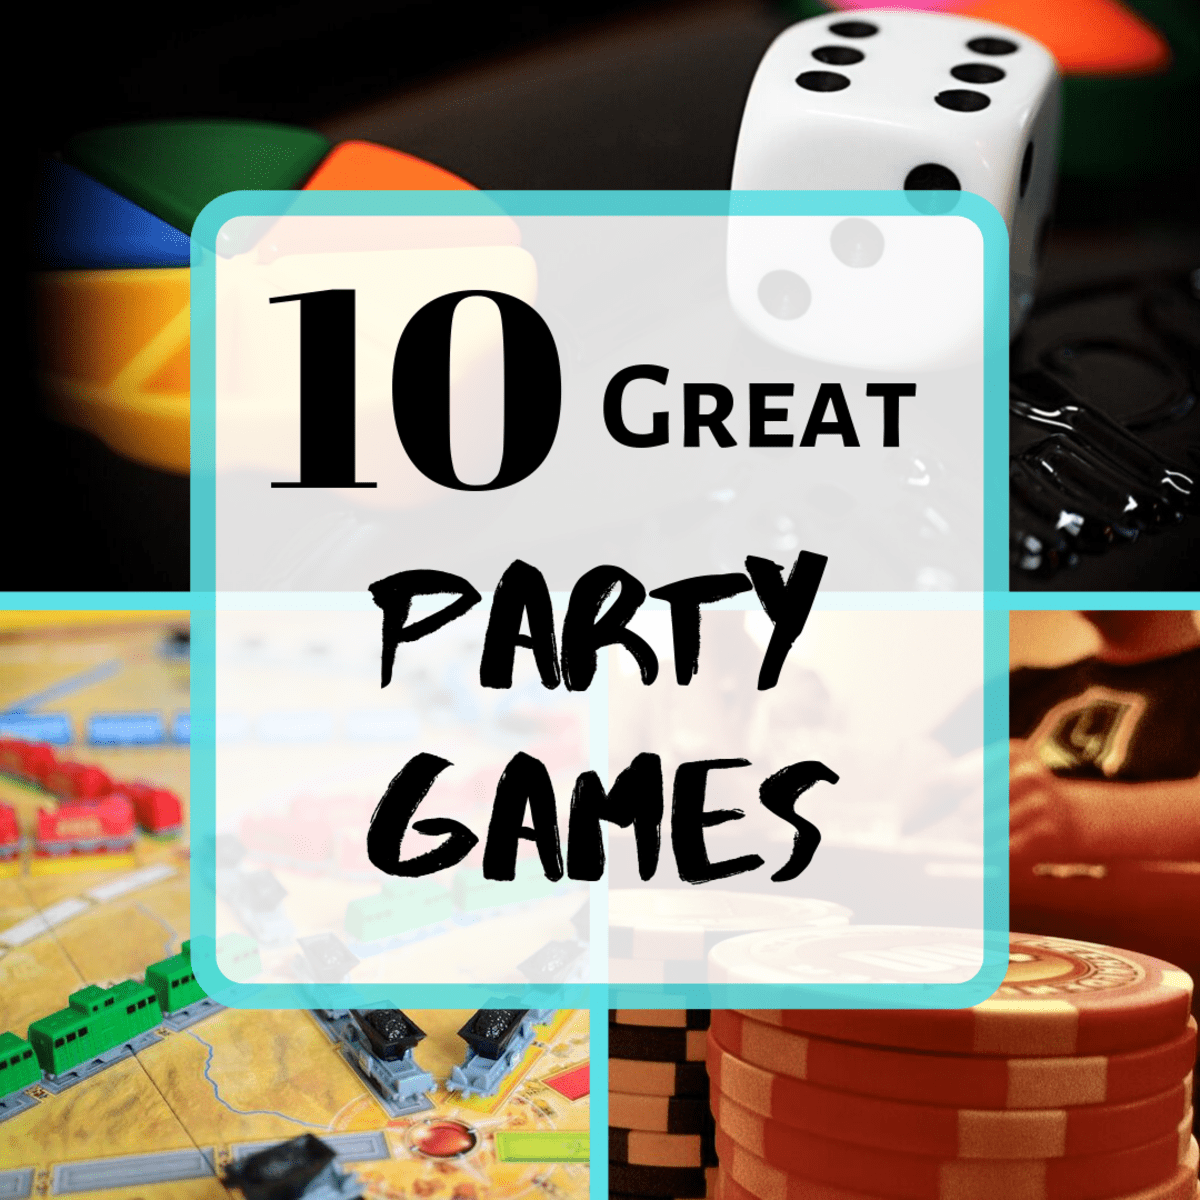 Top 12 Outdoor Games To Play With Family & Friends - HubPages